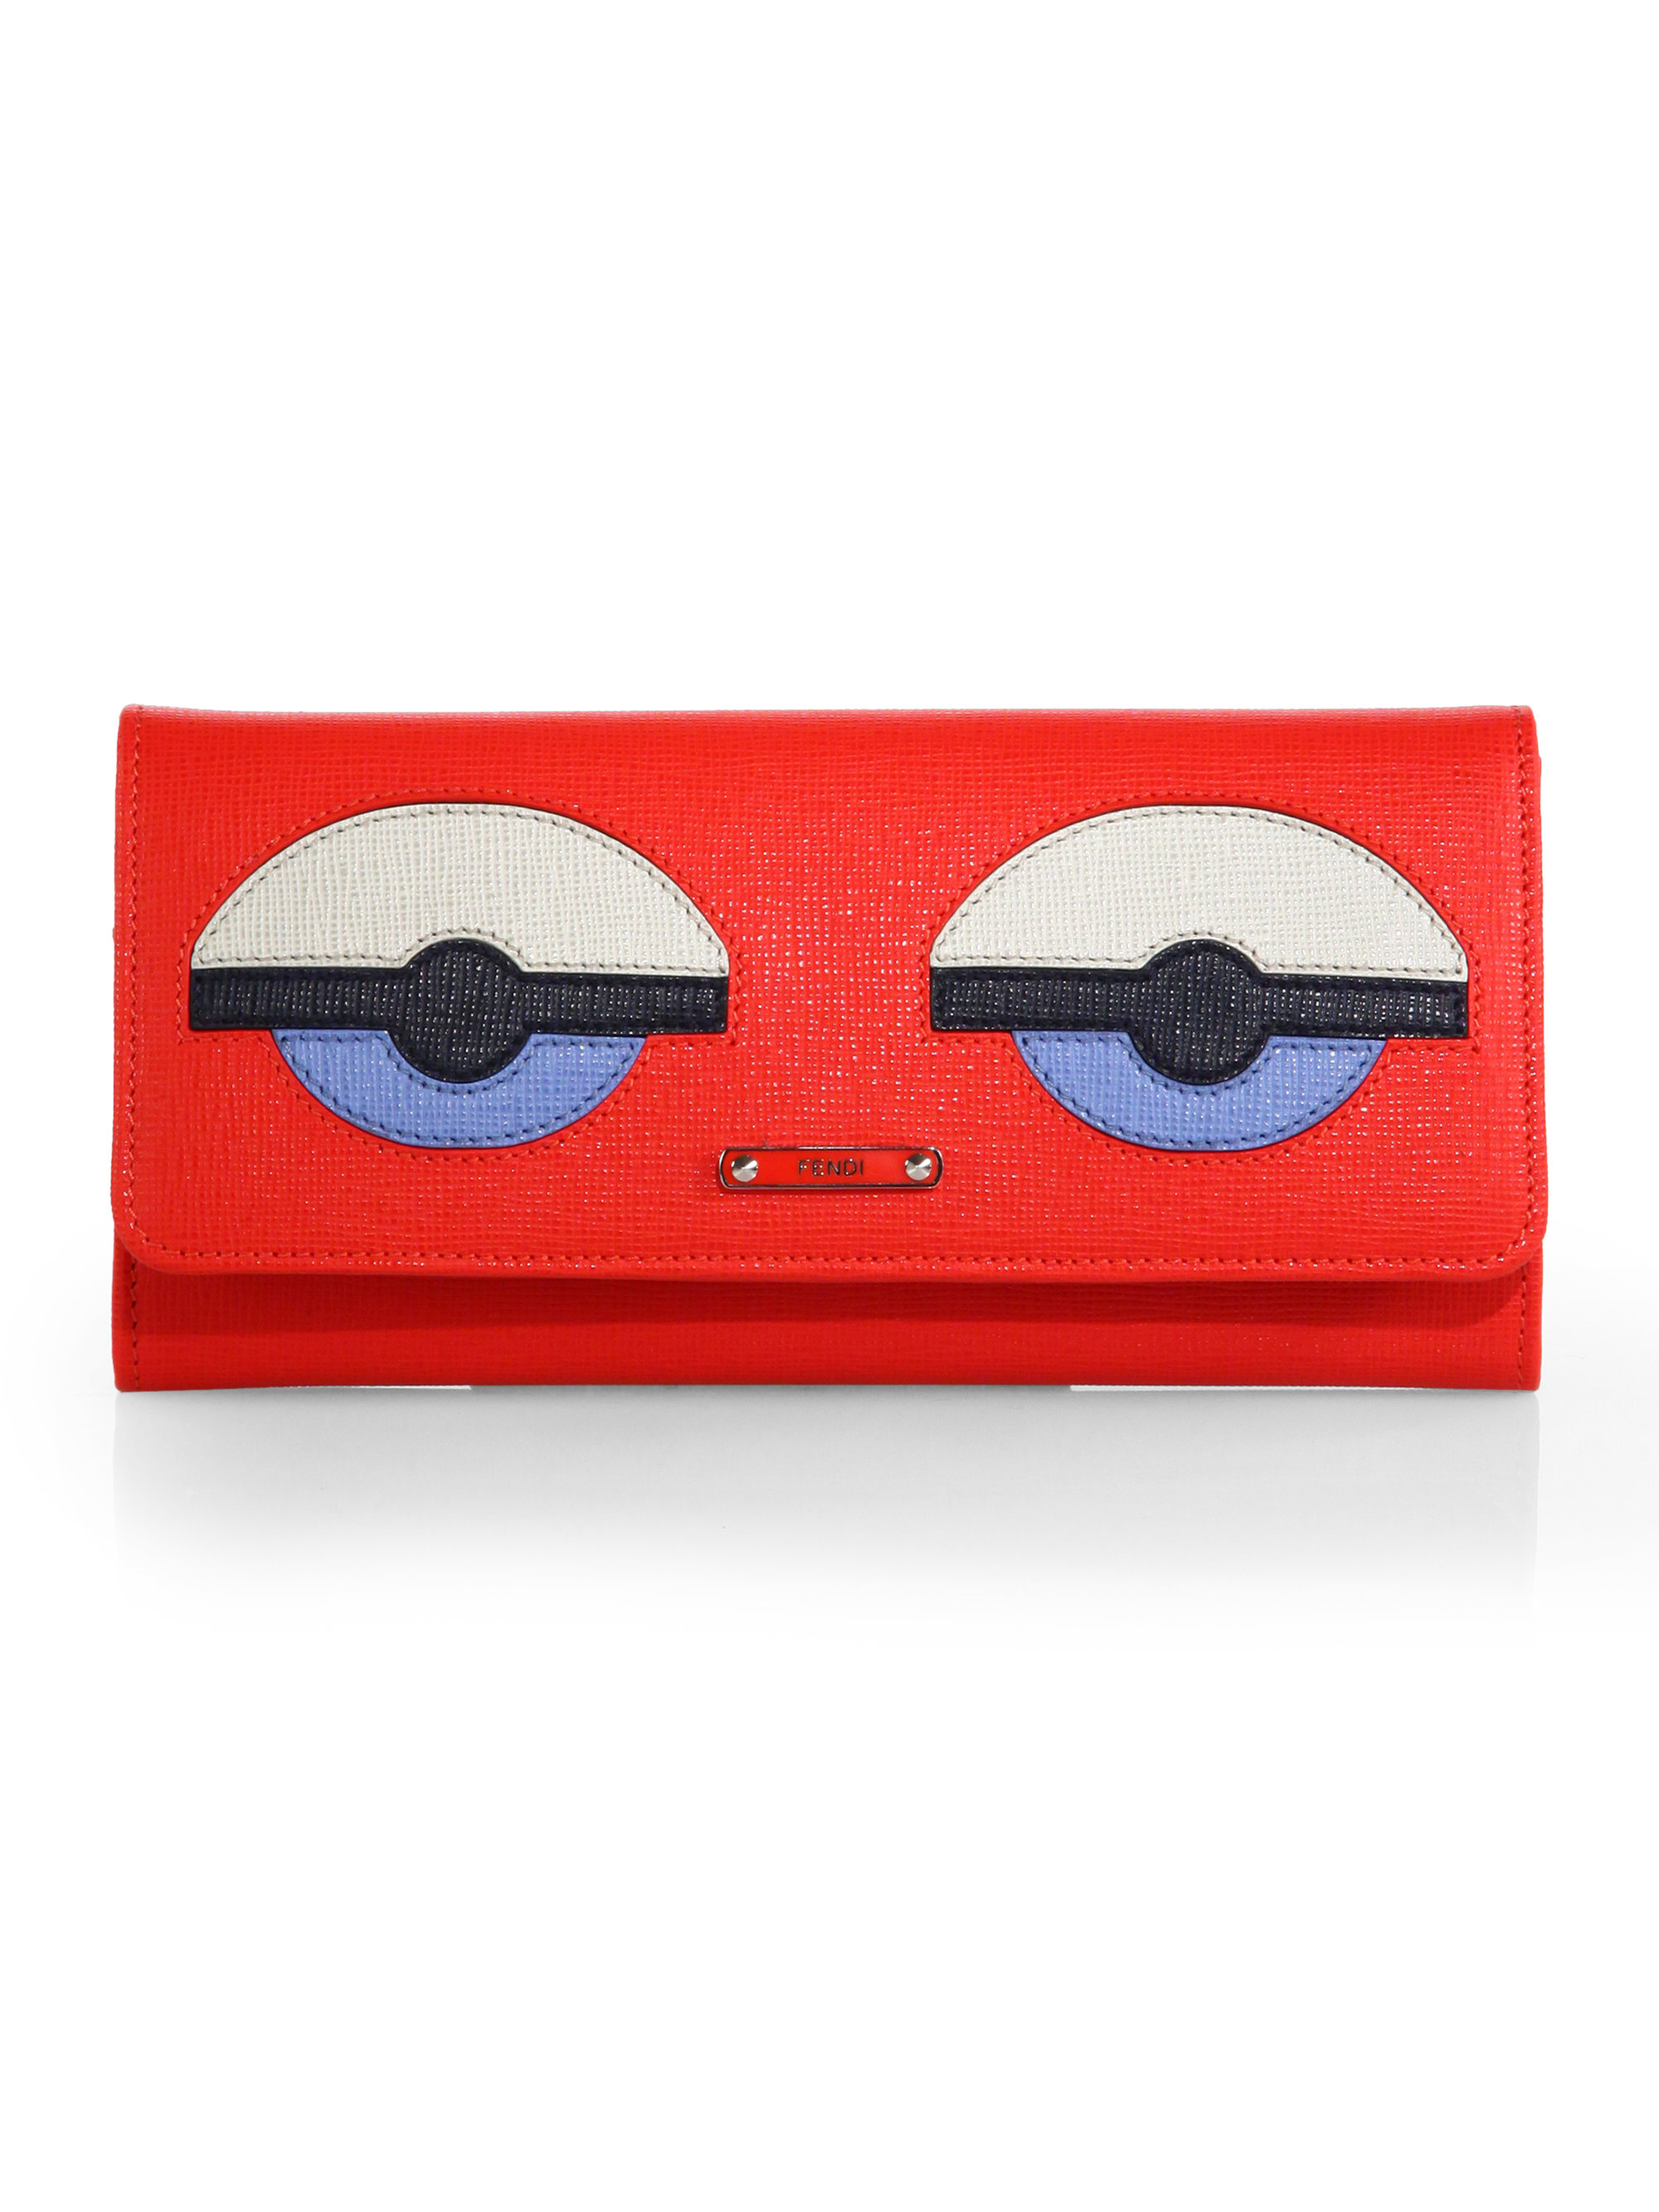 Lyst - Fendi Monster Continental Wallet in Red